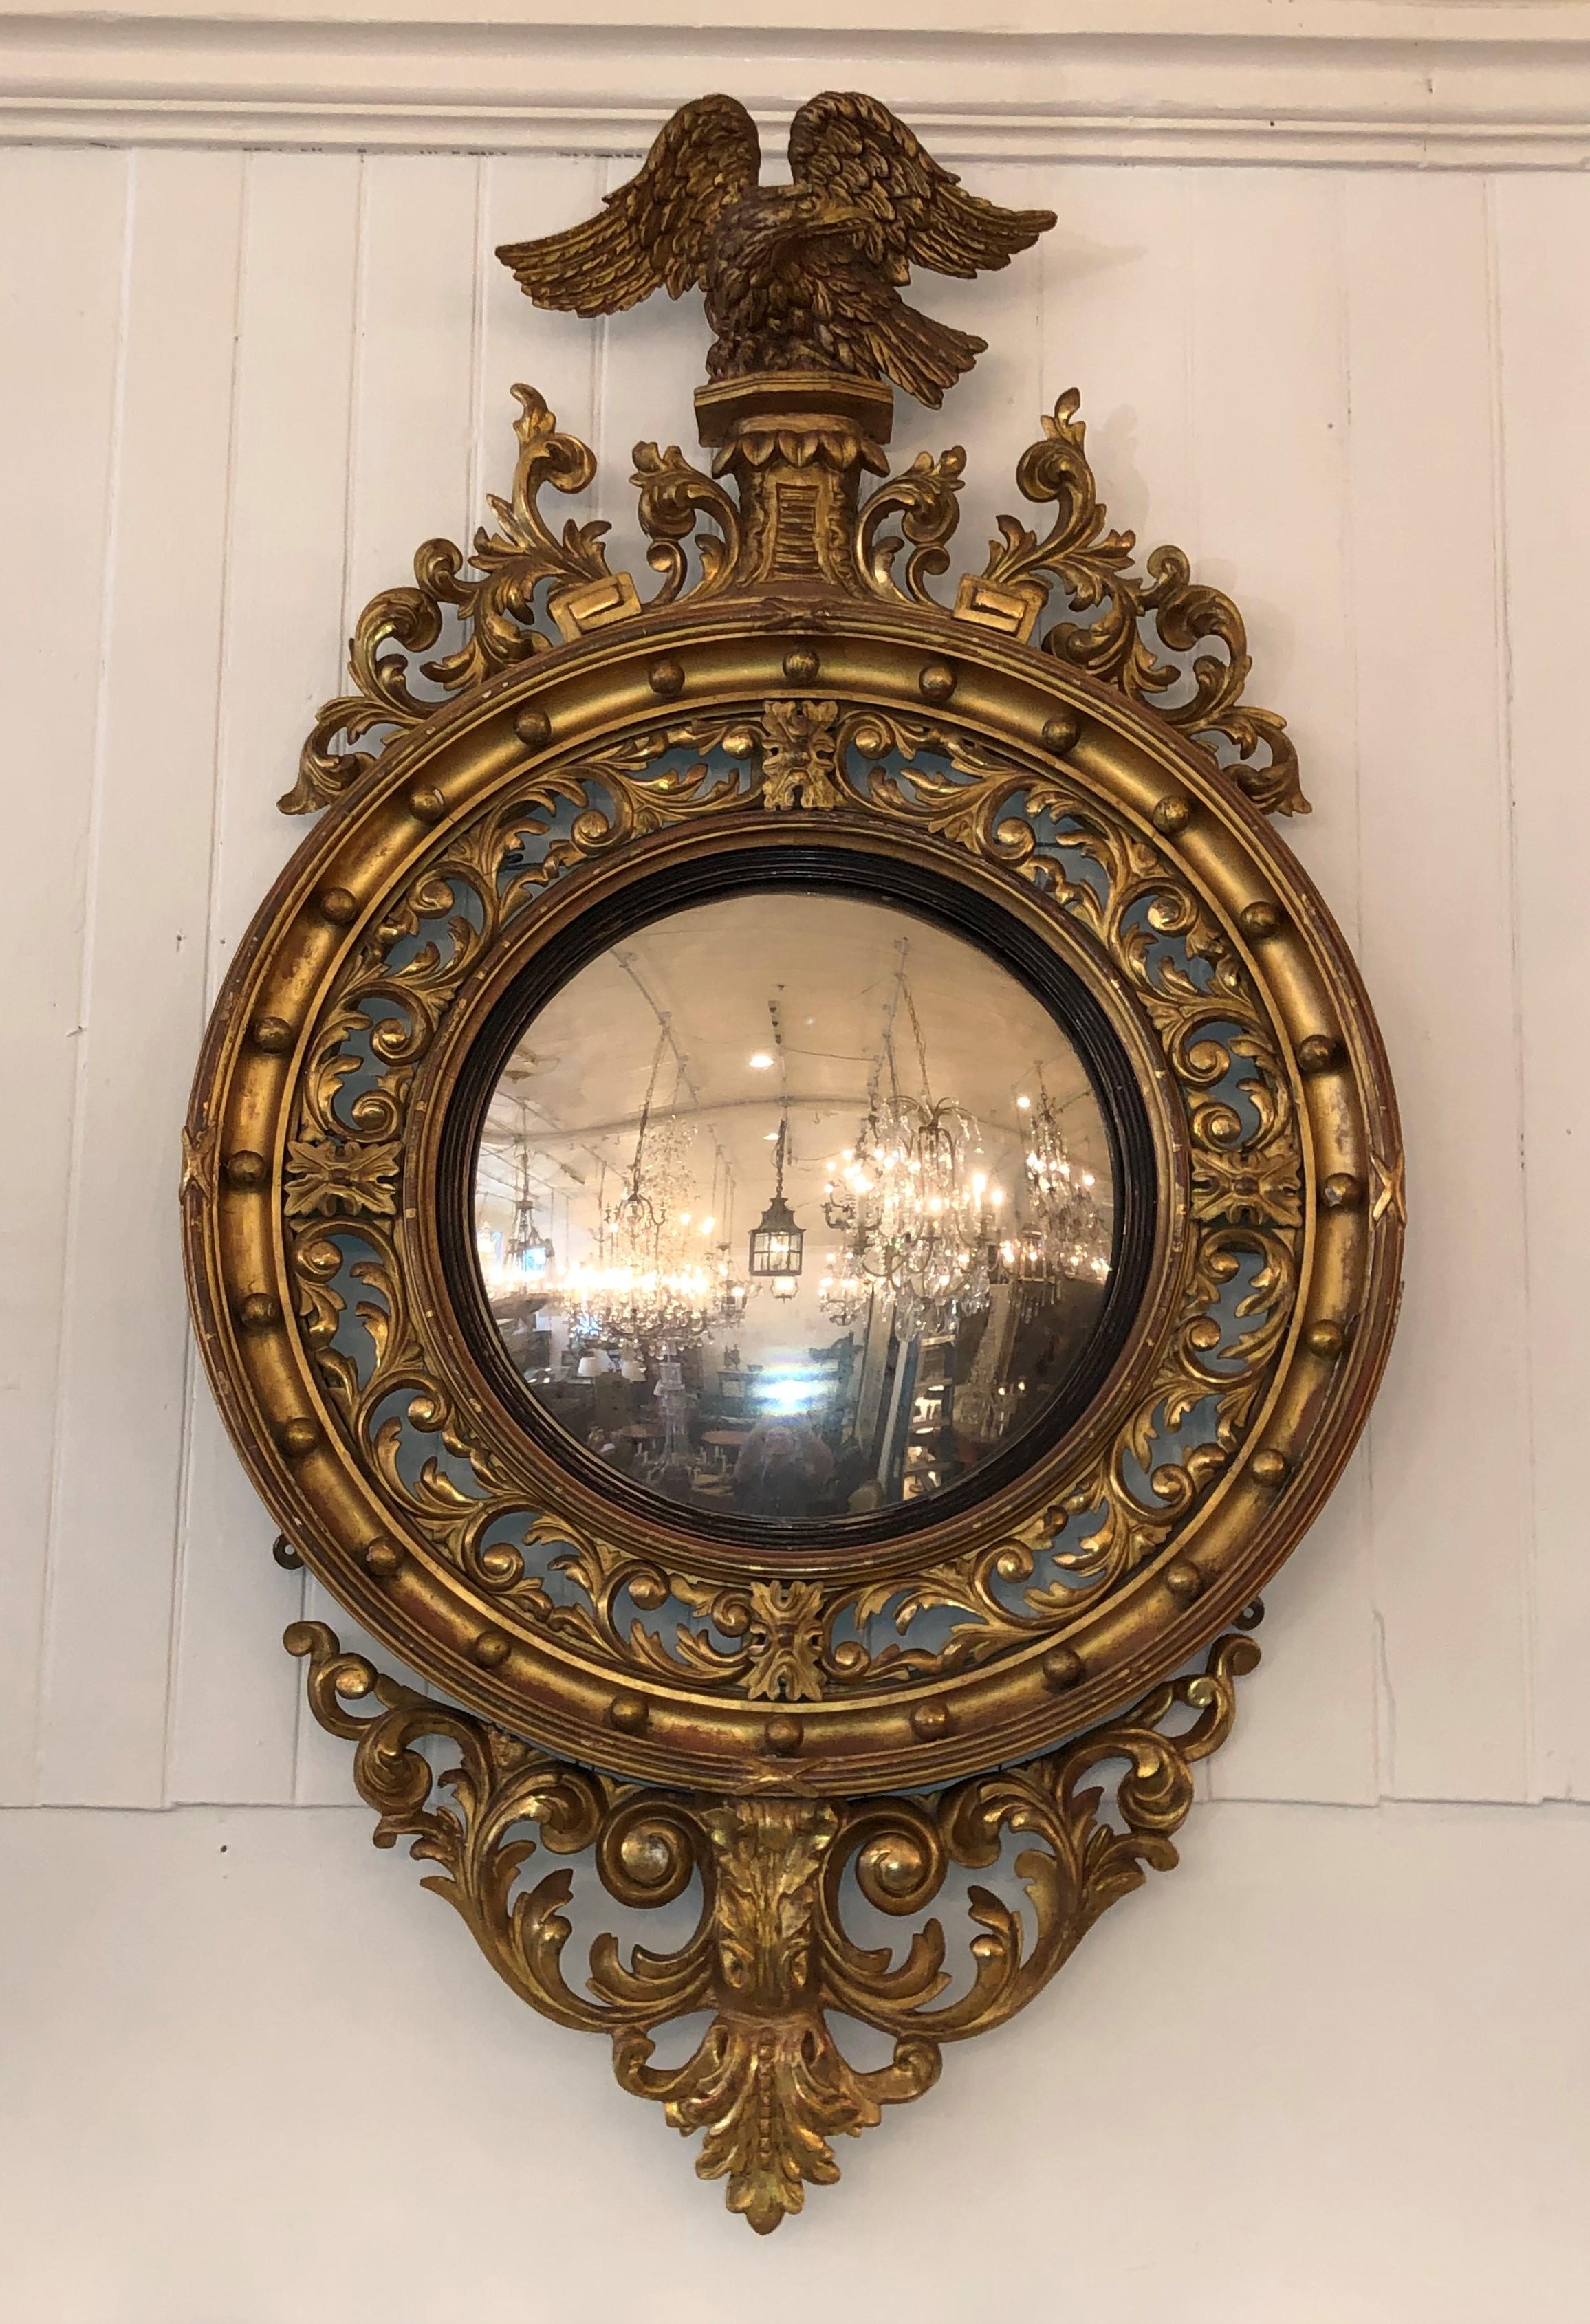 This imposing Regency convex mirror is hand carved and gilded. The pediment has an eagle perched on a plinth flanked by foliage scrolls. The mirror frame is opened pierced craved with foliage scrolls and surrounded by twenty-four gilded balls. The